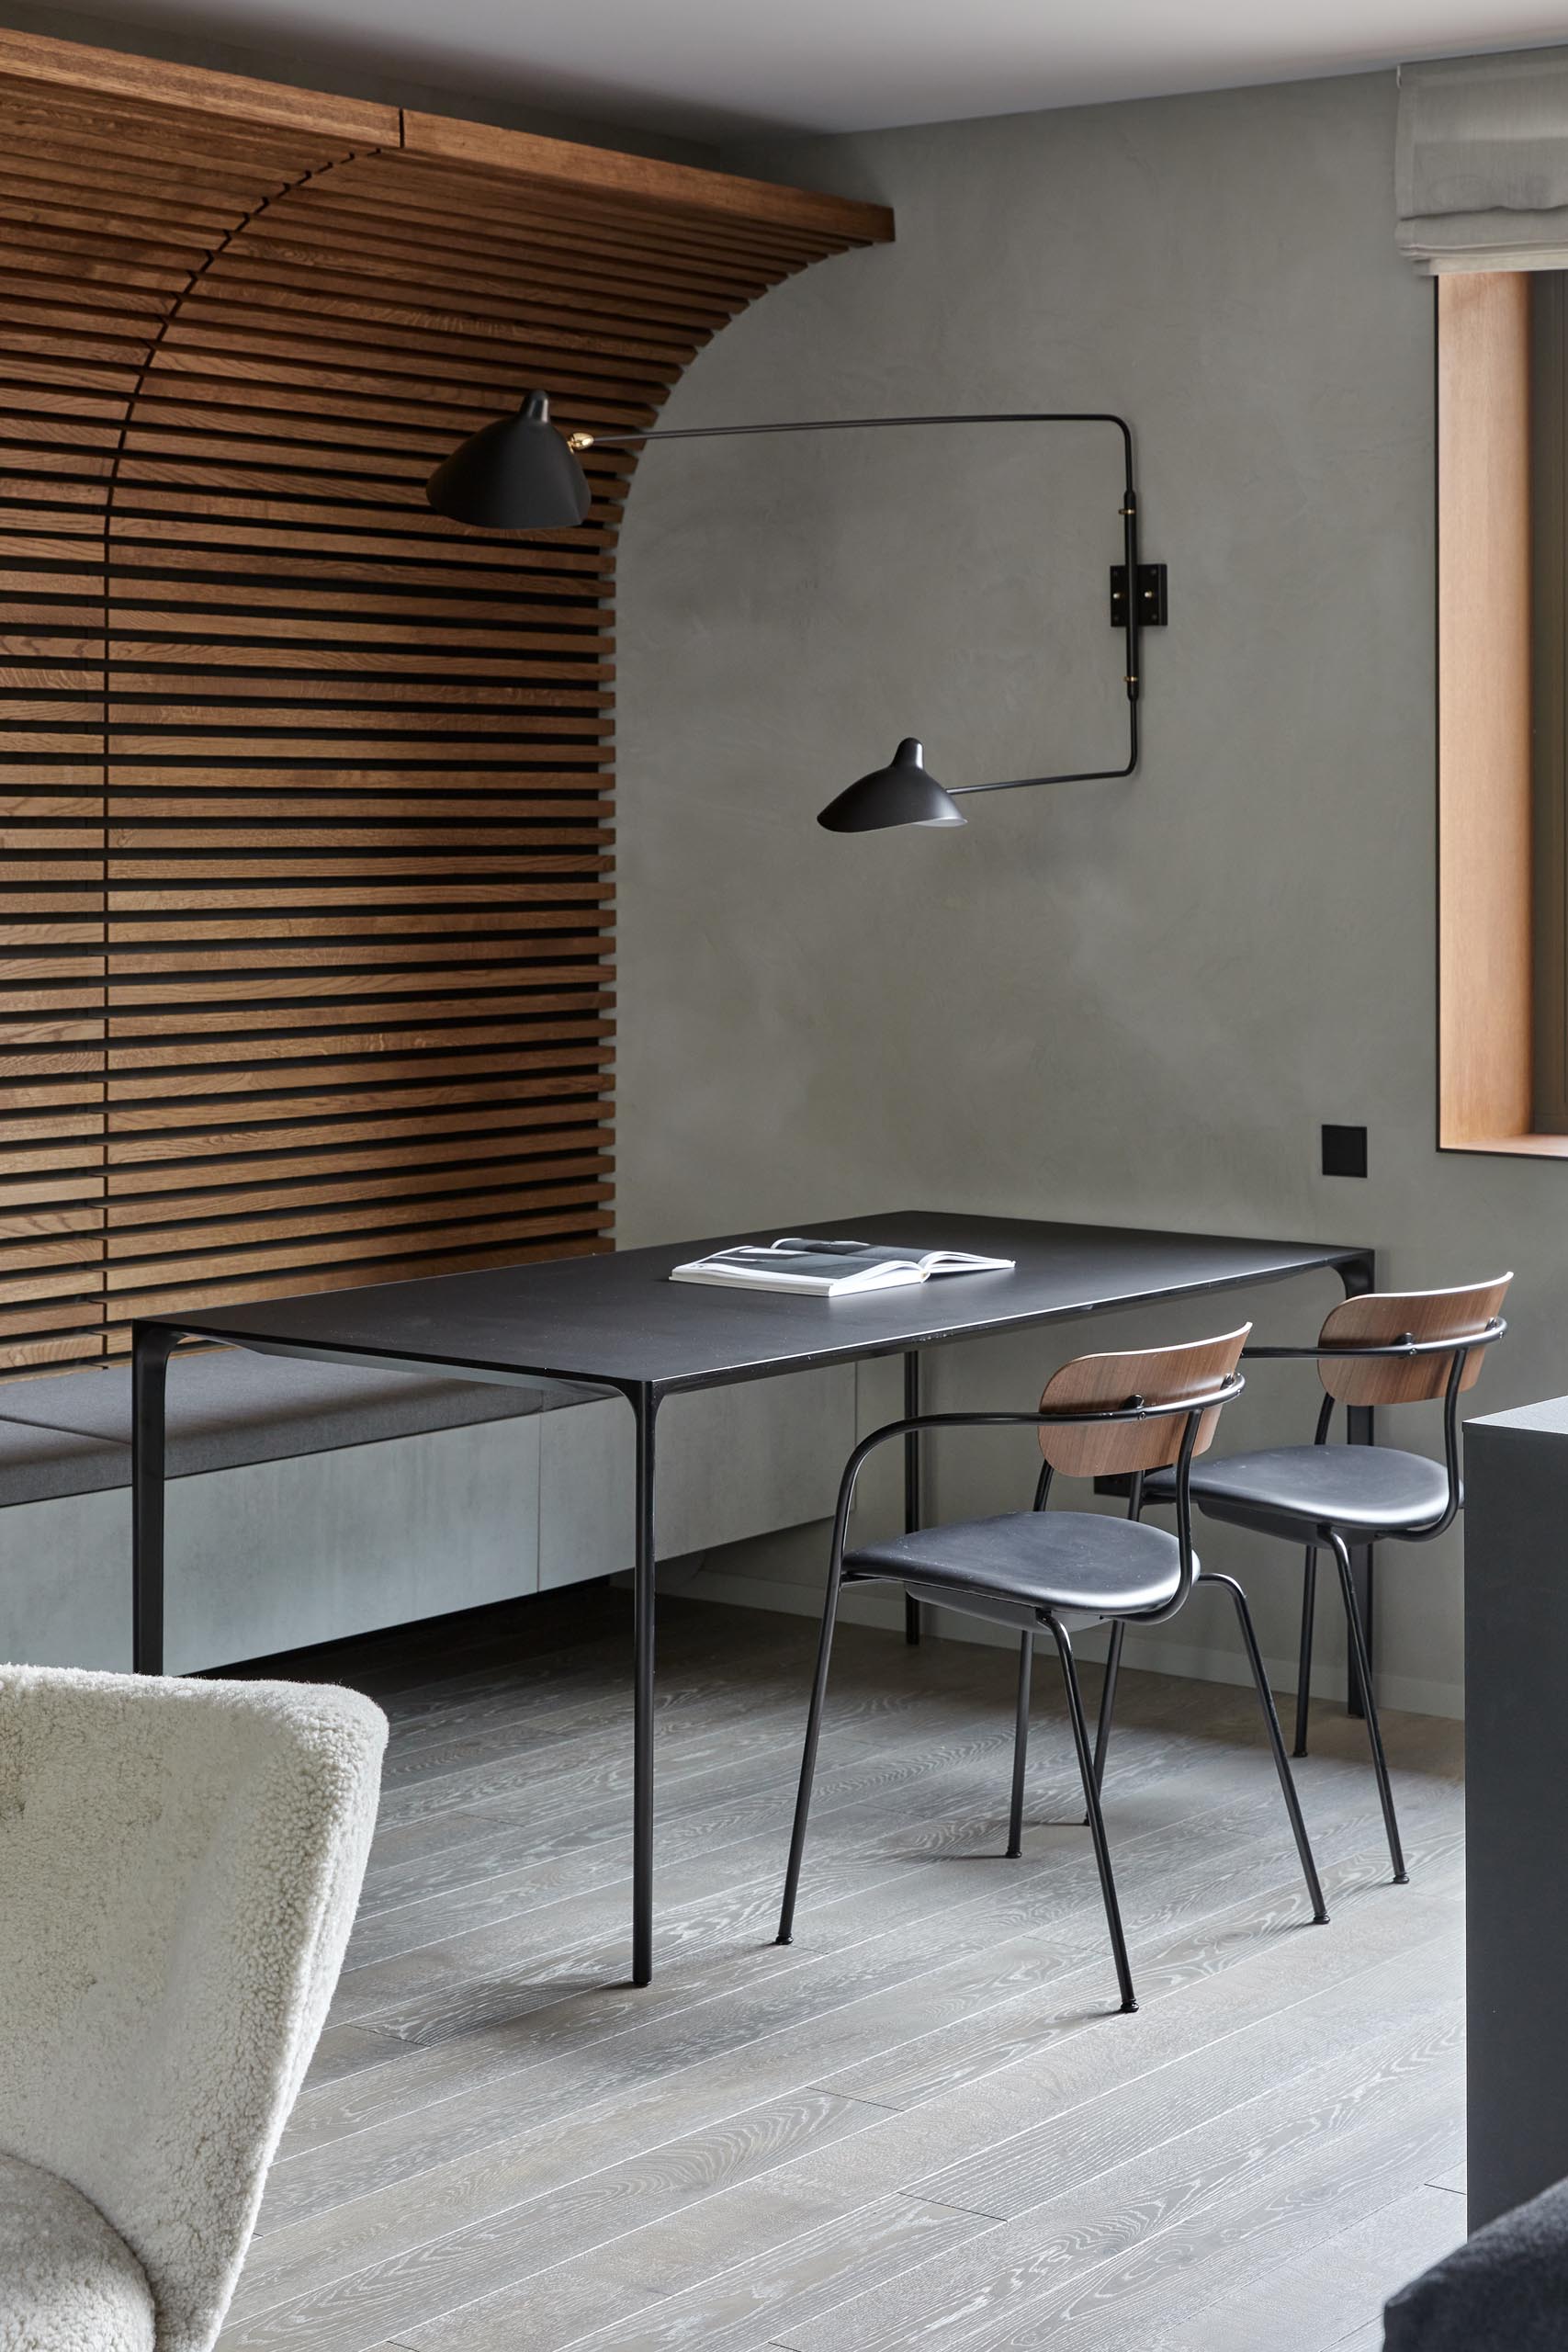 In this modern dining area, the bottom of the wood wall meets a ledge with an upholstered cushion that doubles as bench seating for the dining table.